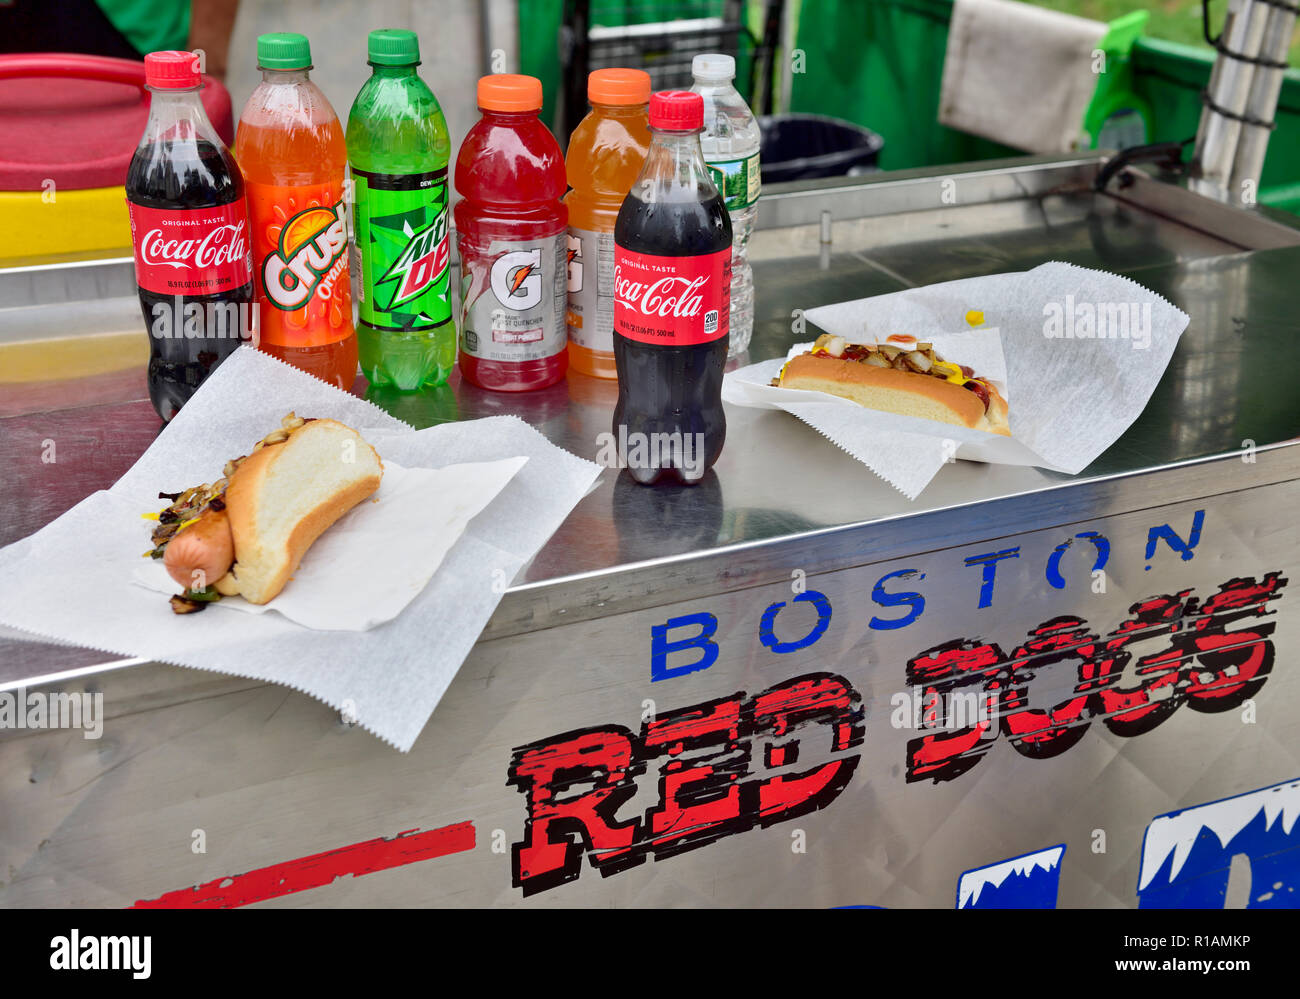 American mobile hot dog street vendor with red dogs and drinks, by Boston Common park, Boston MA, USA Stock Photo